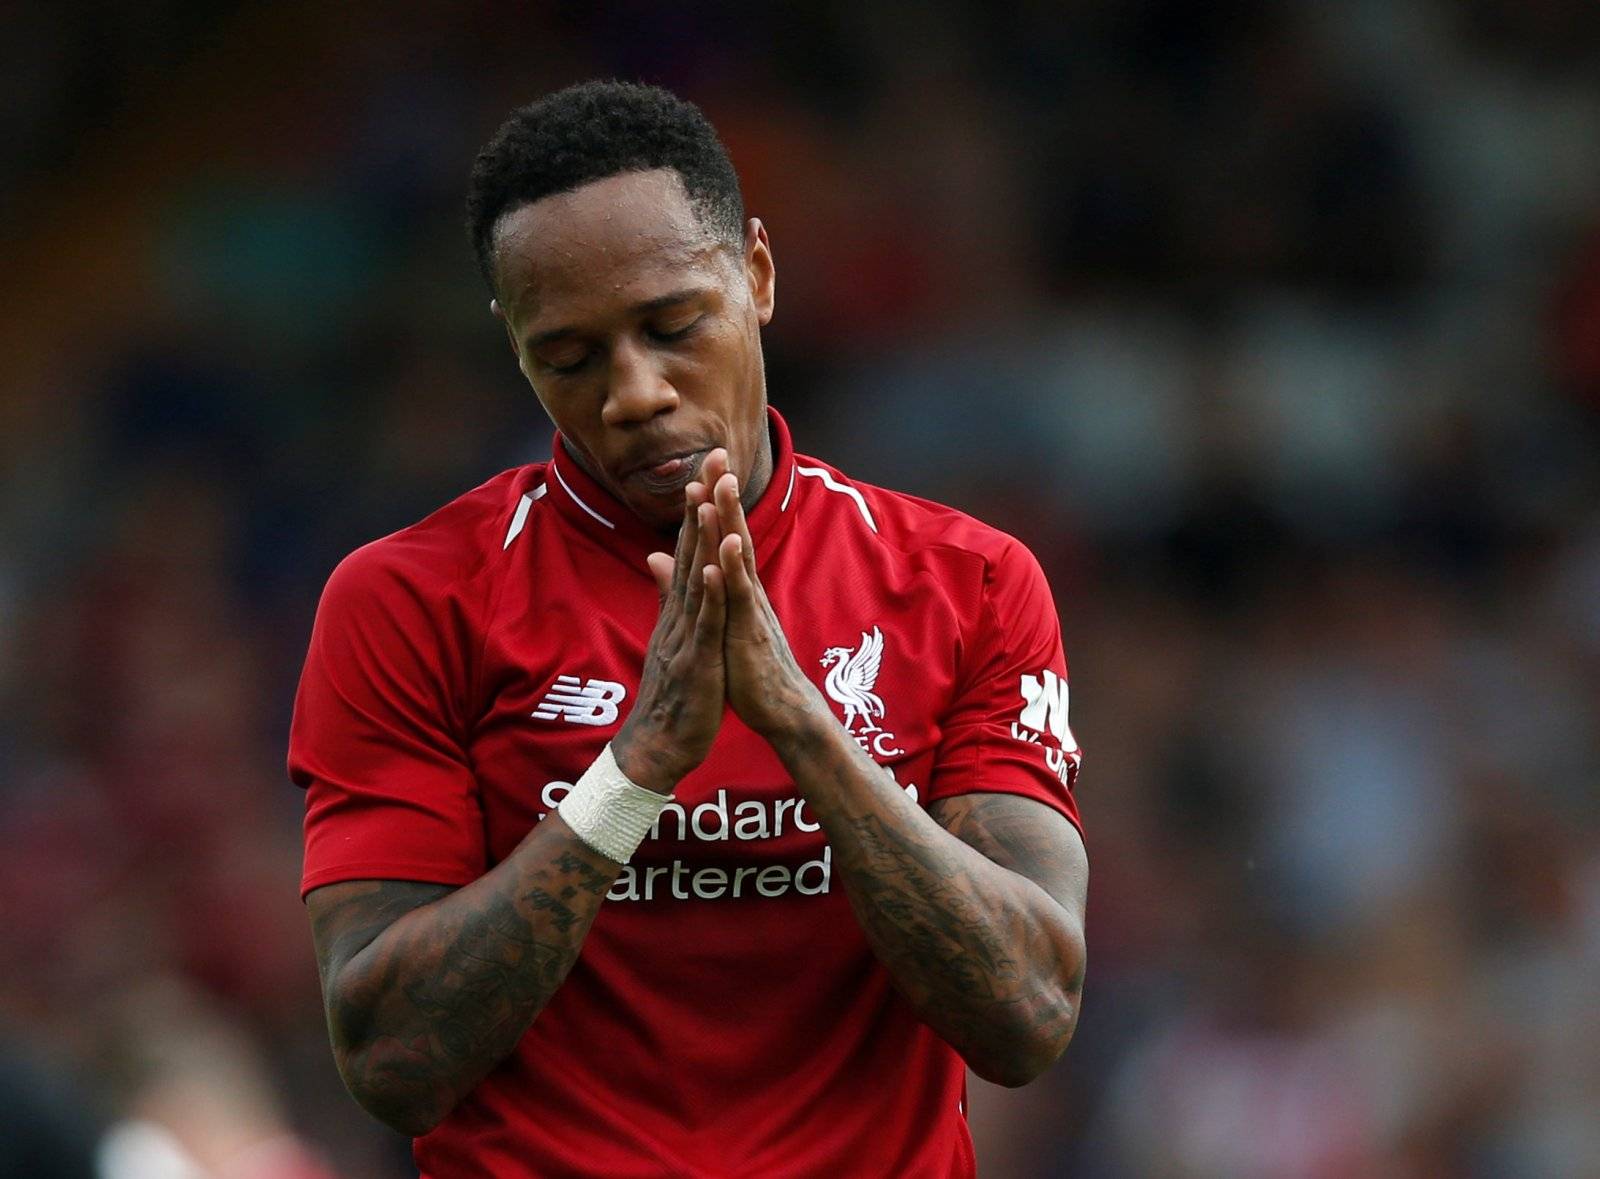 Controversial Everton move for Nathaniel Clyne would give Seamus Coleman something to think about - Everton